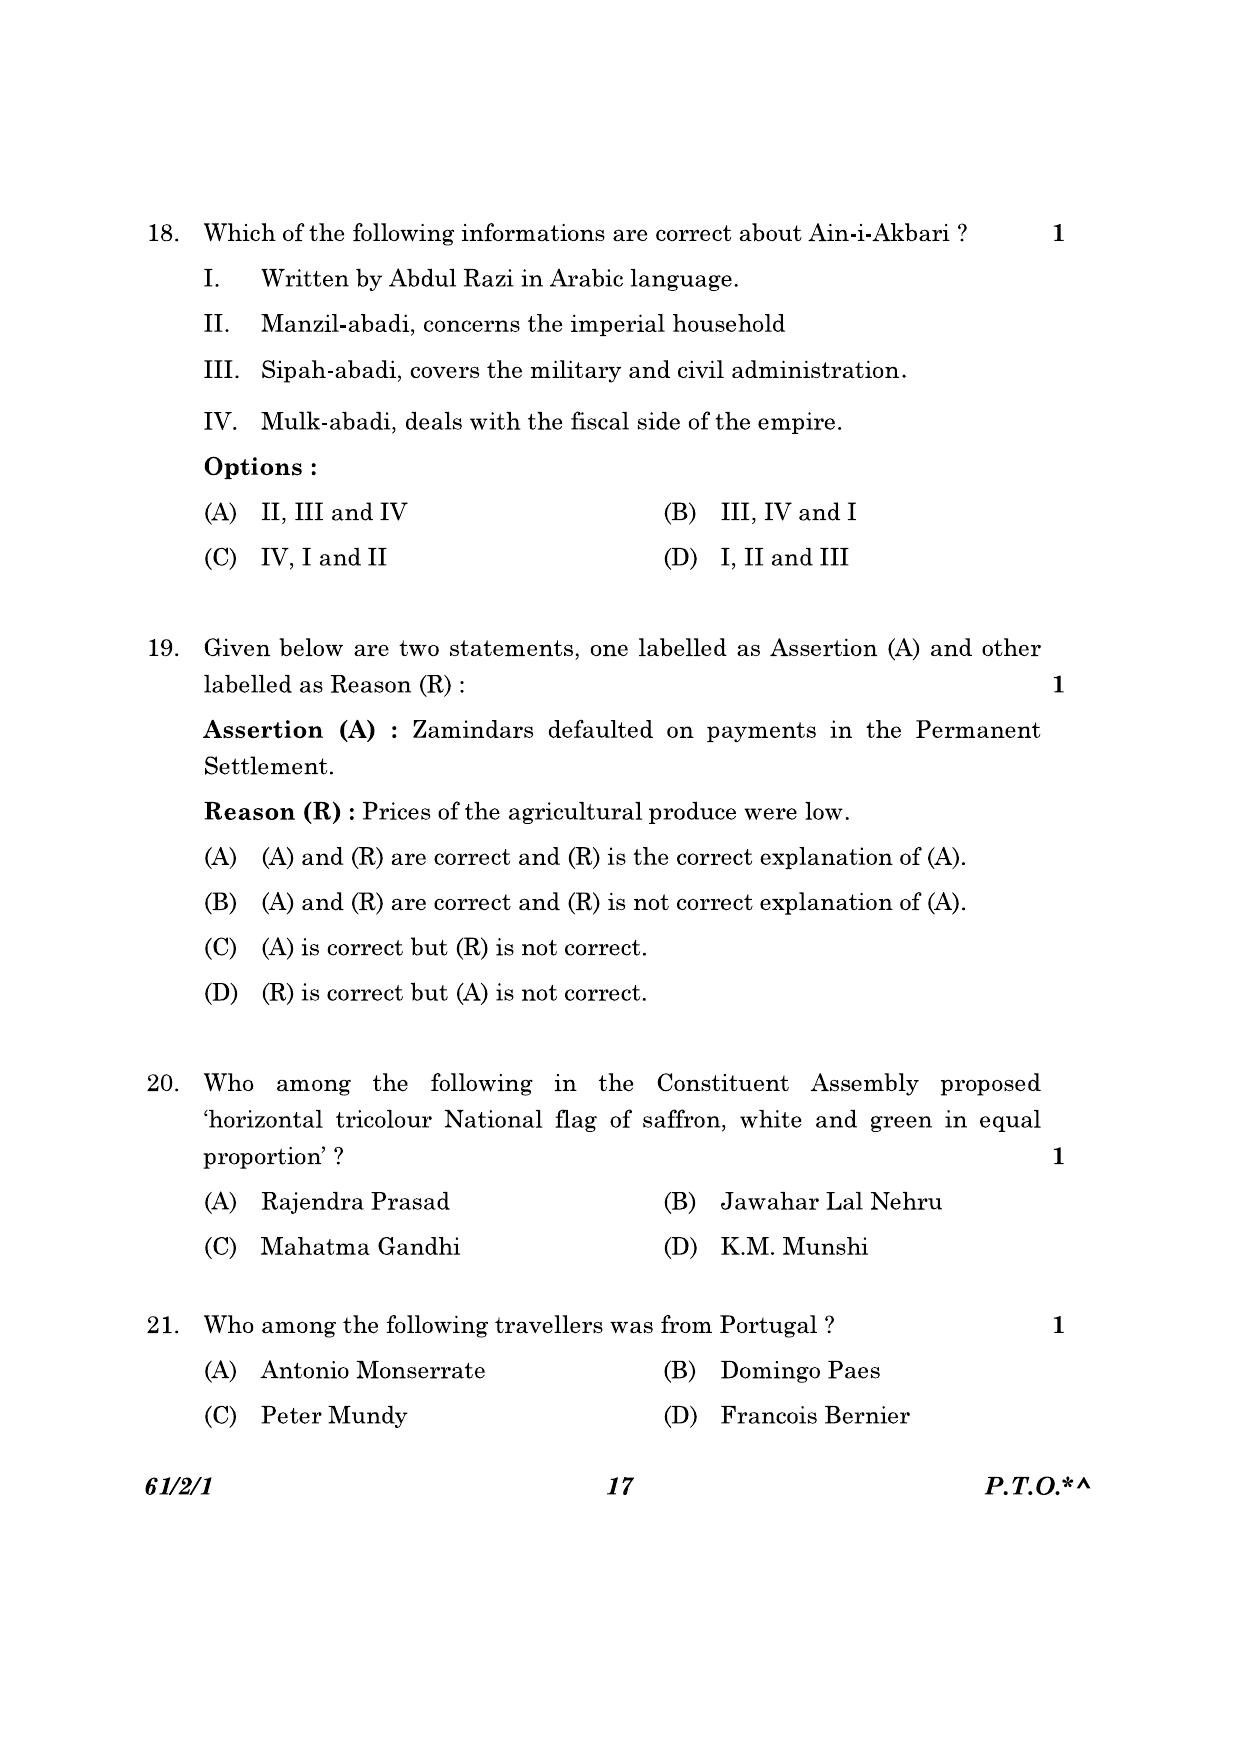 CBSE Class 12 61-2-1 History 2023 Question Paper - Page 17